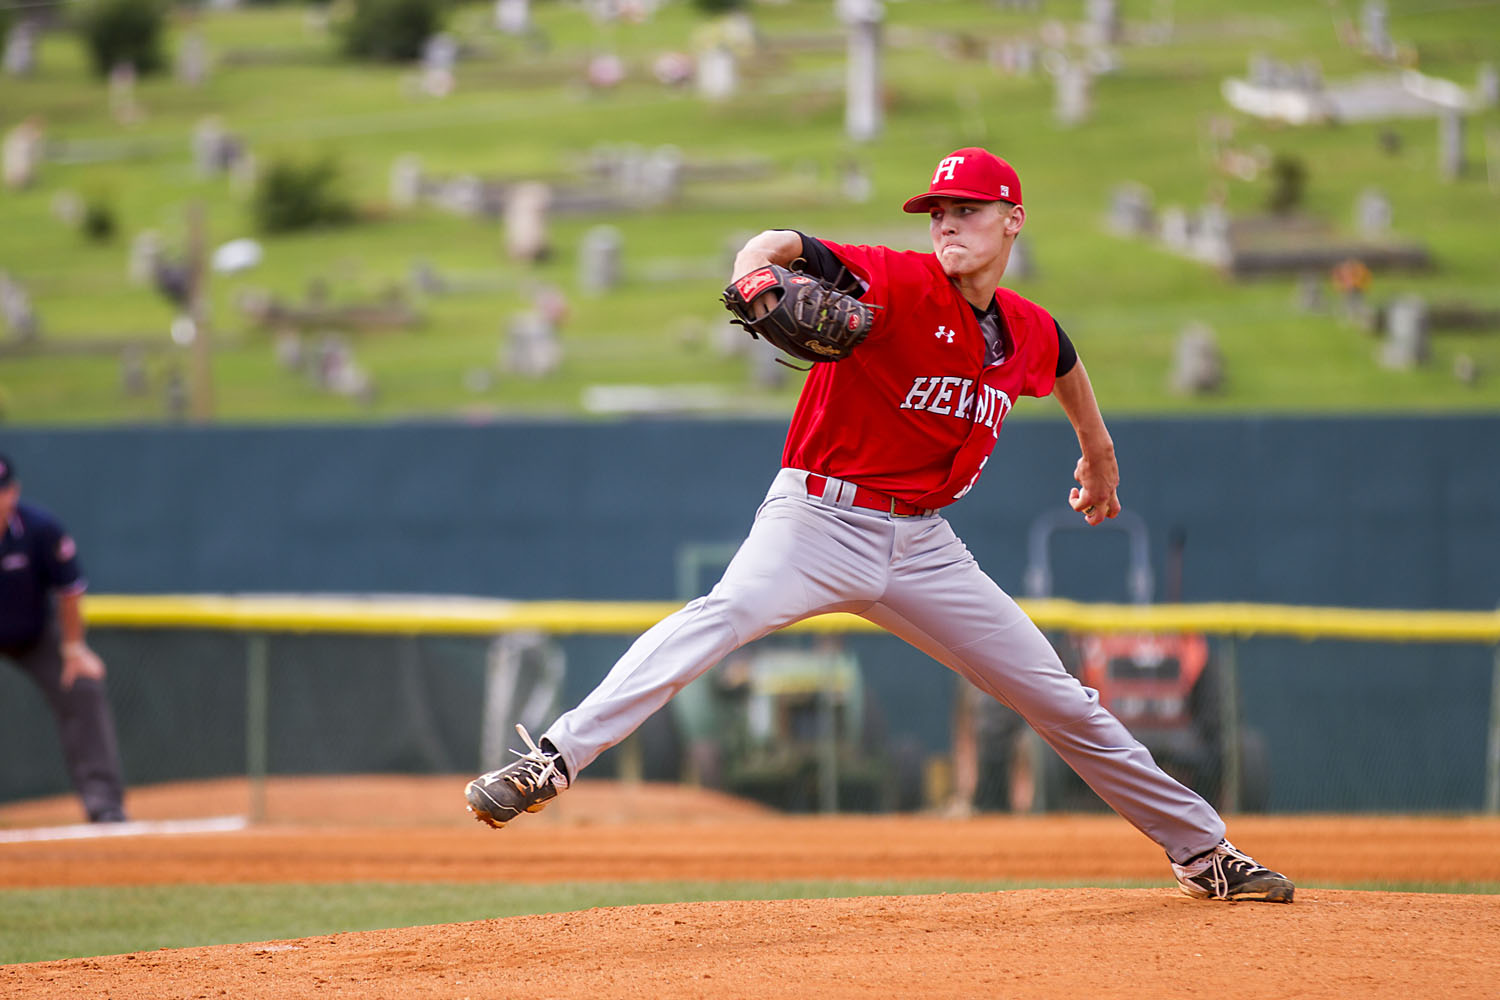 7A Baseball State Championship: Hewitt-Trussville vs Auburn, how they got here, what to expect